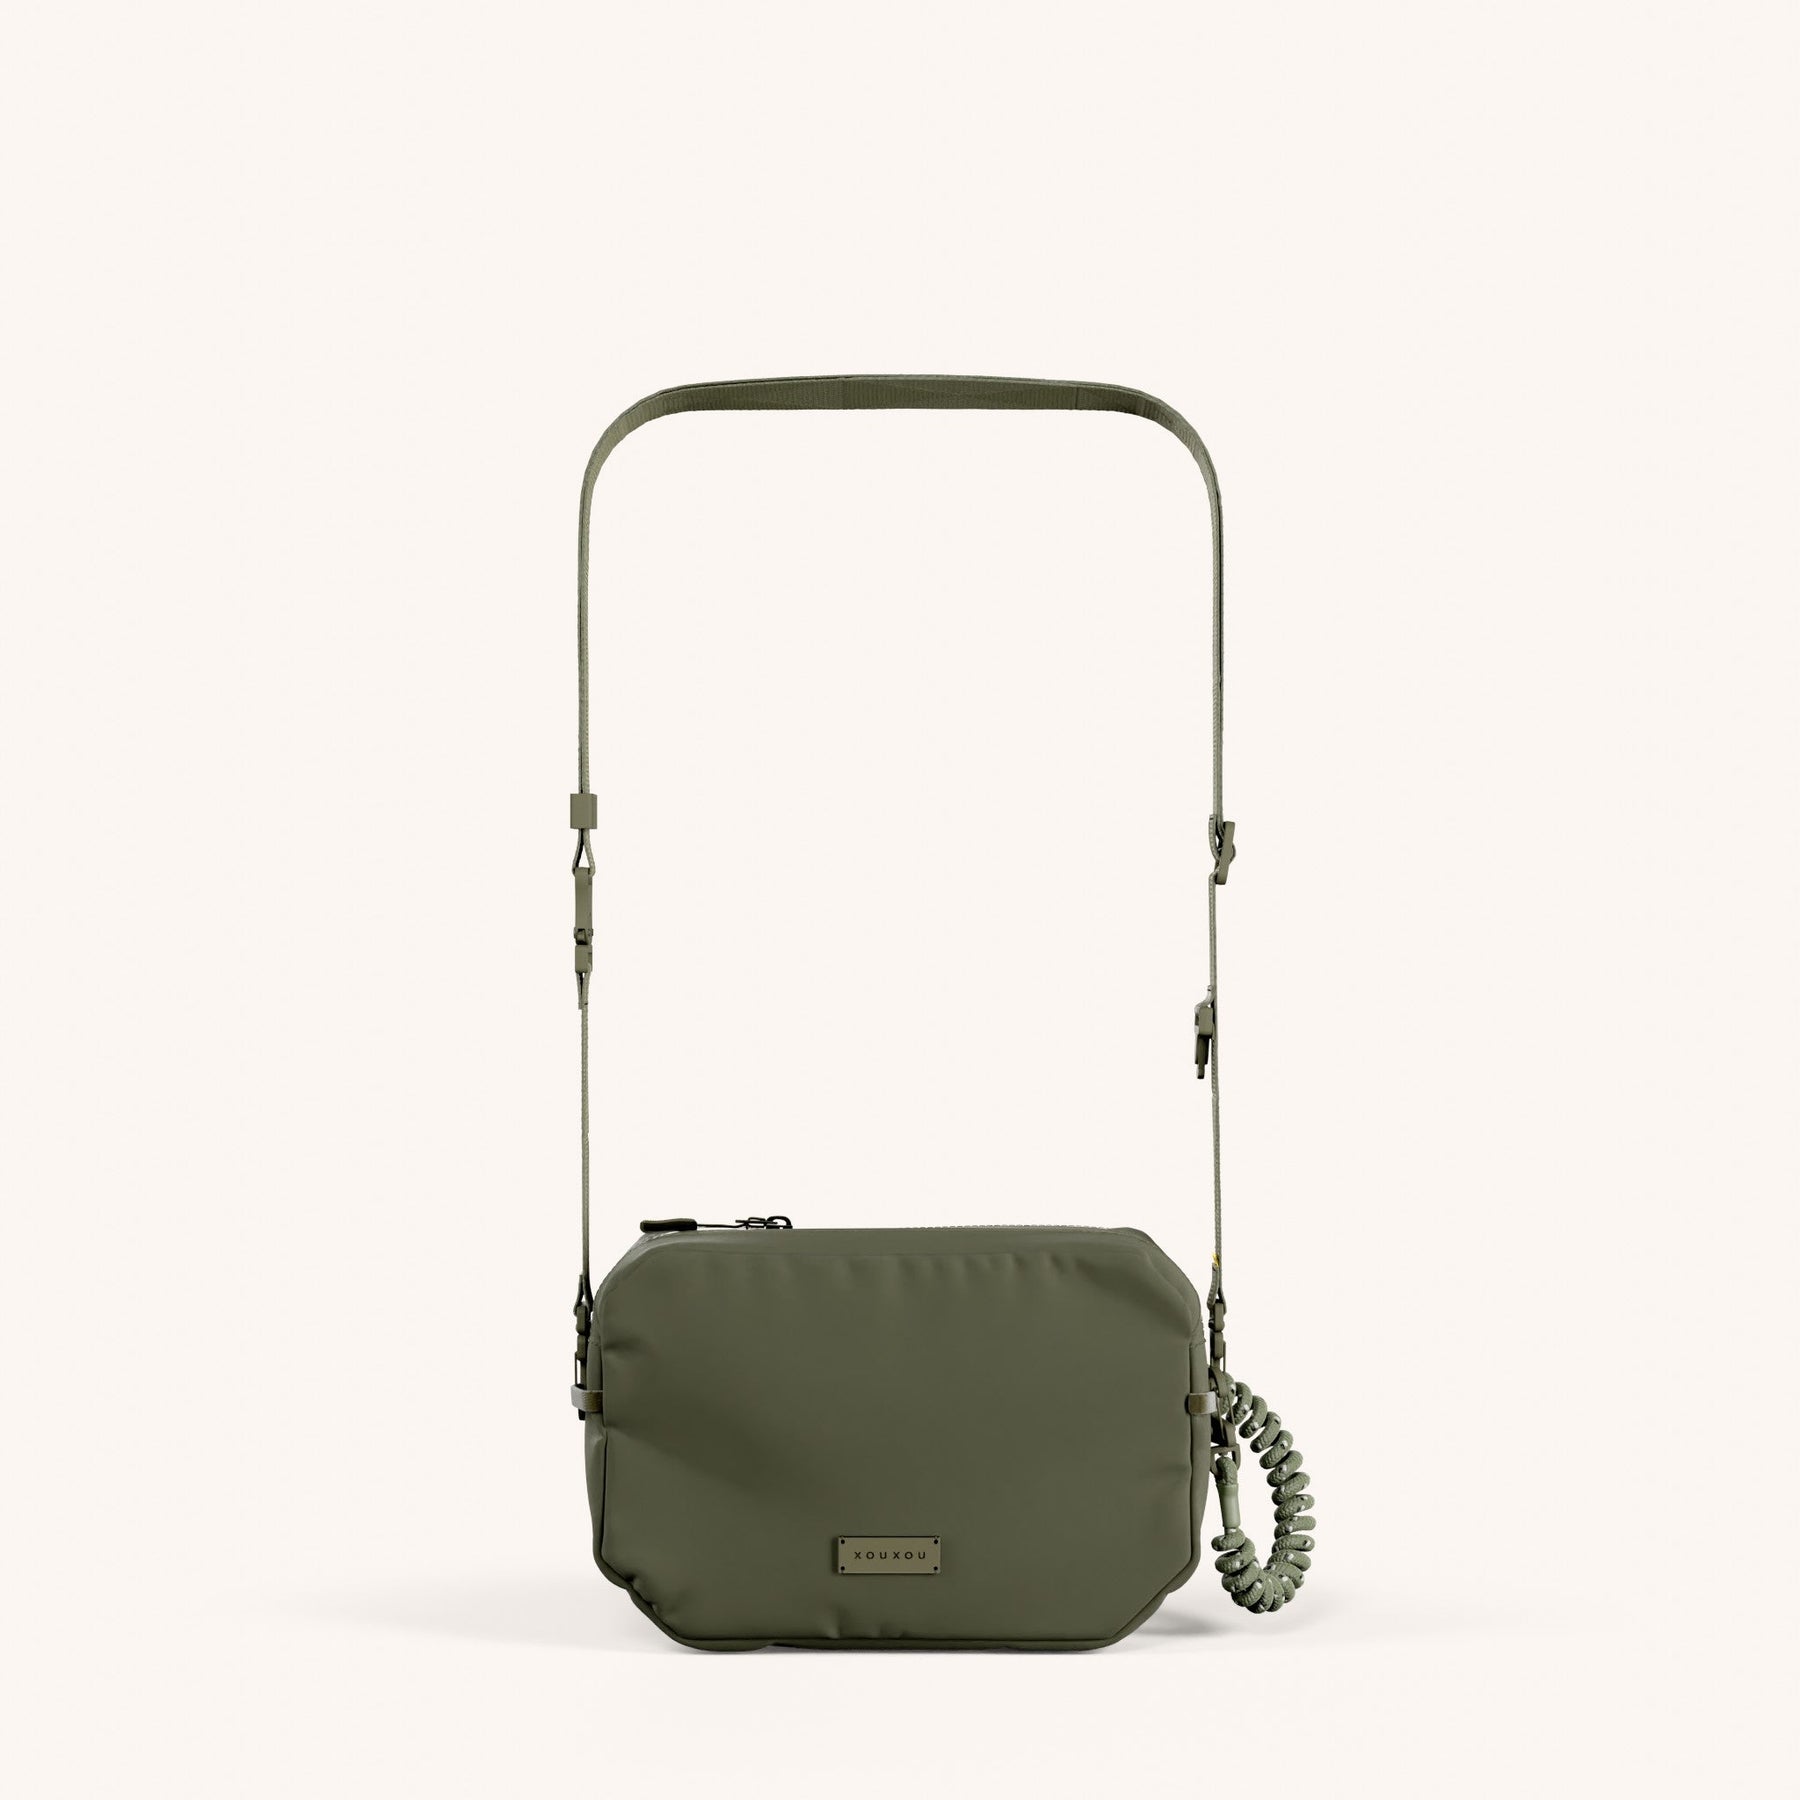 Crossbody Bag with Lanyard in Moss Total View | XOUXOU